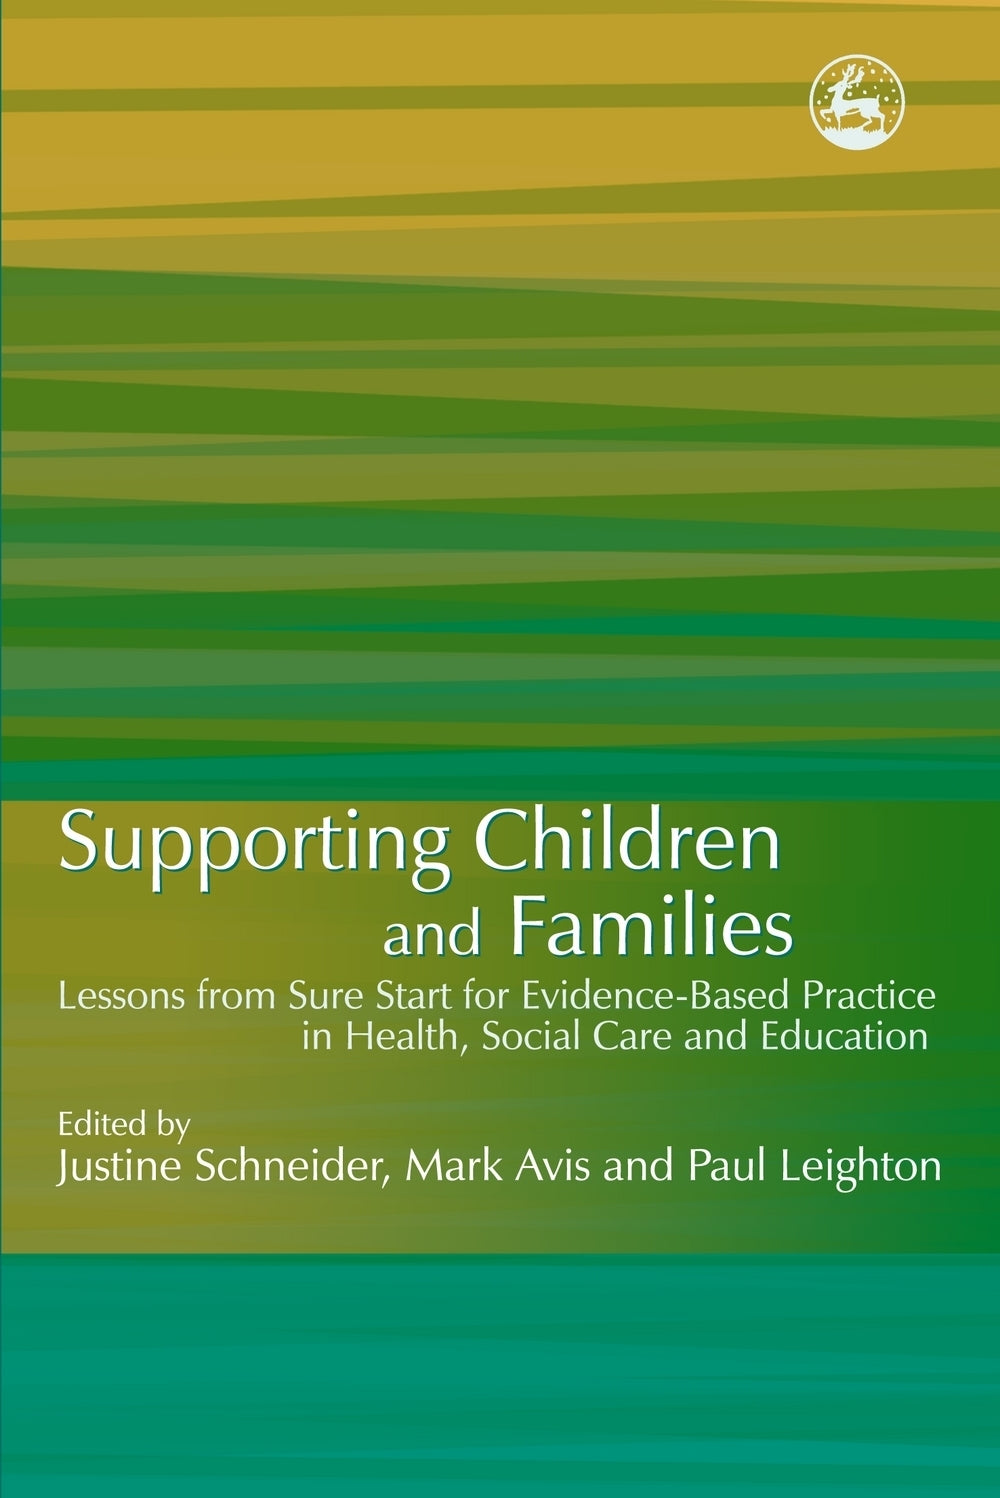 Supporting Children and Families by No Author Listed, Mark Avis, Justine Schneider, Paul Leighton